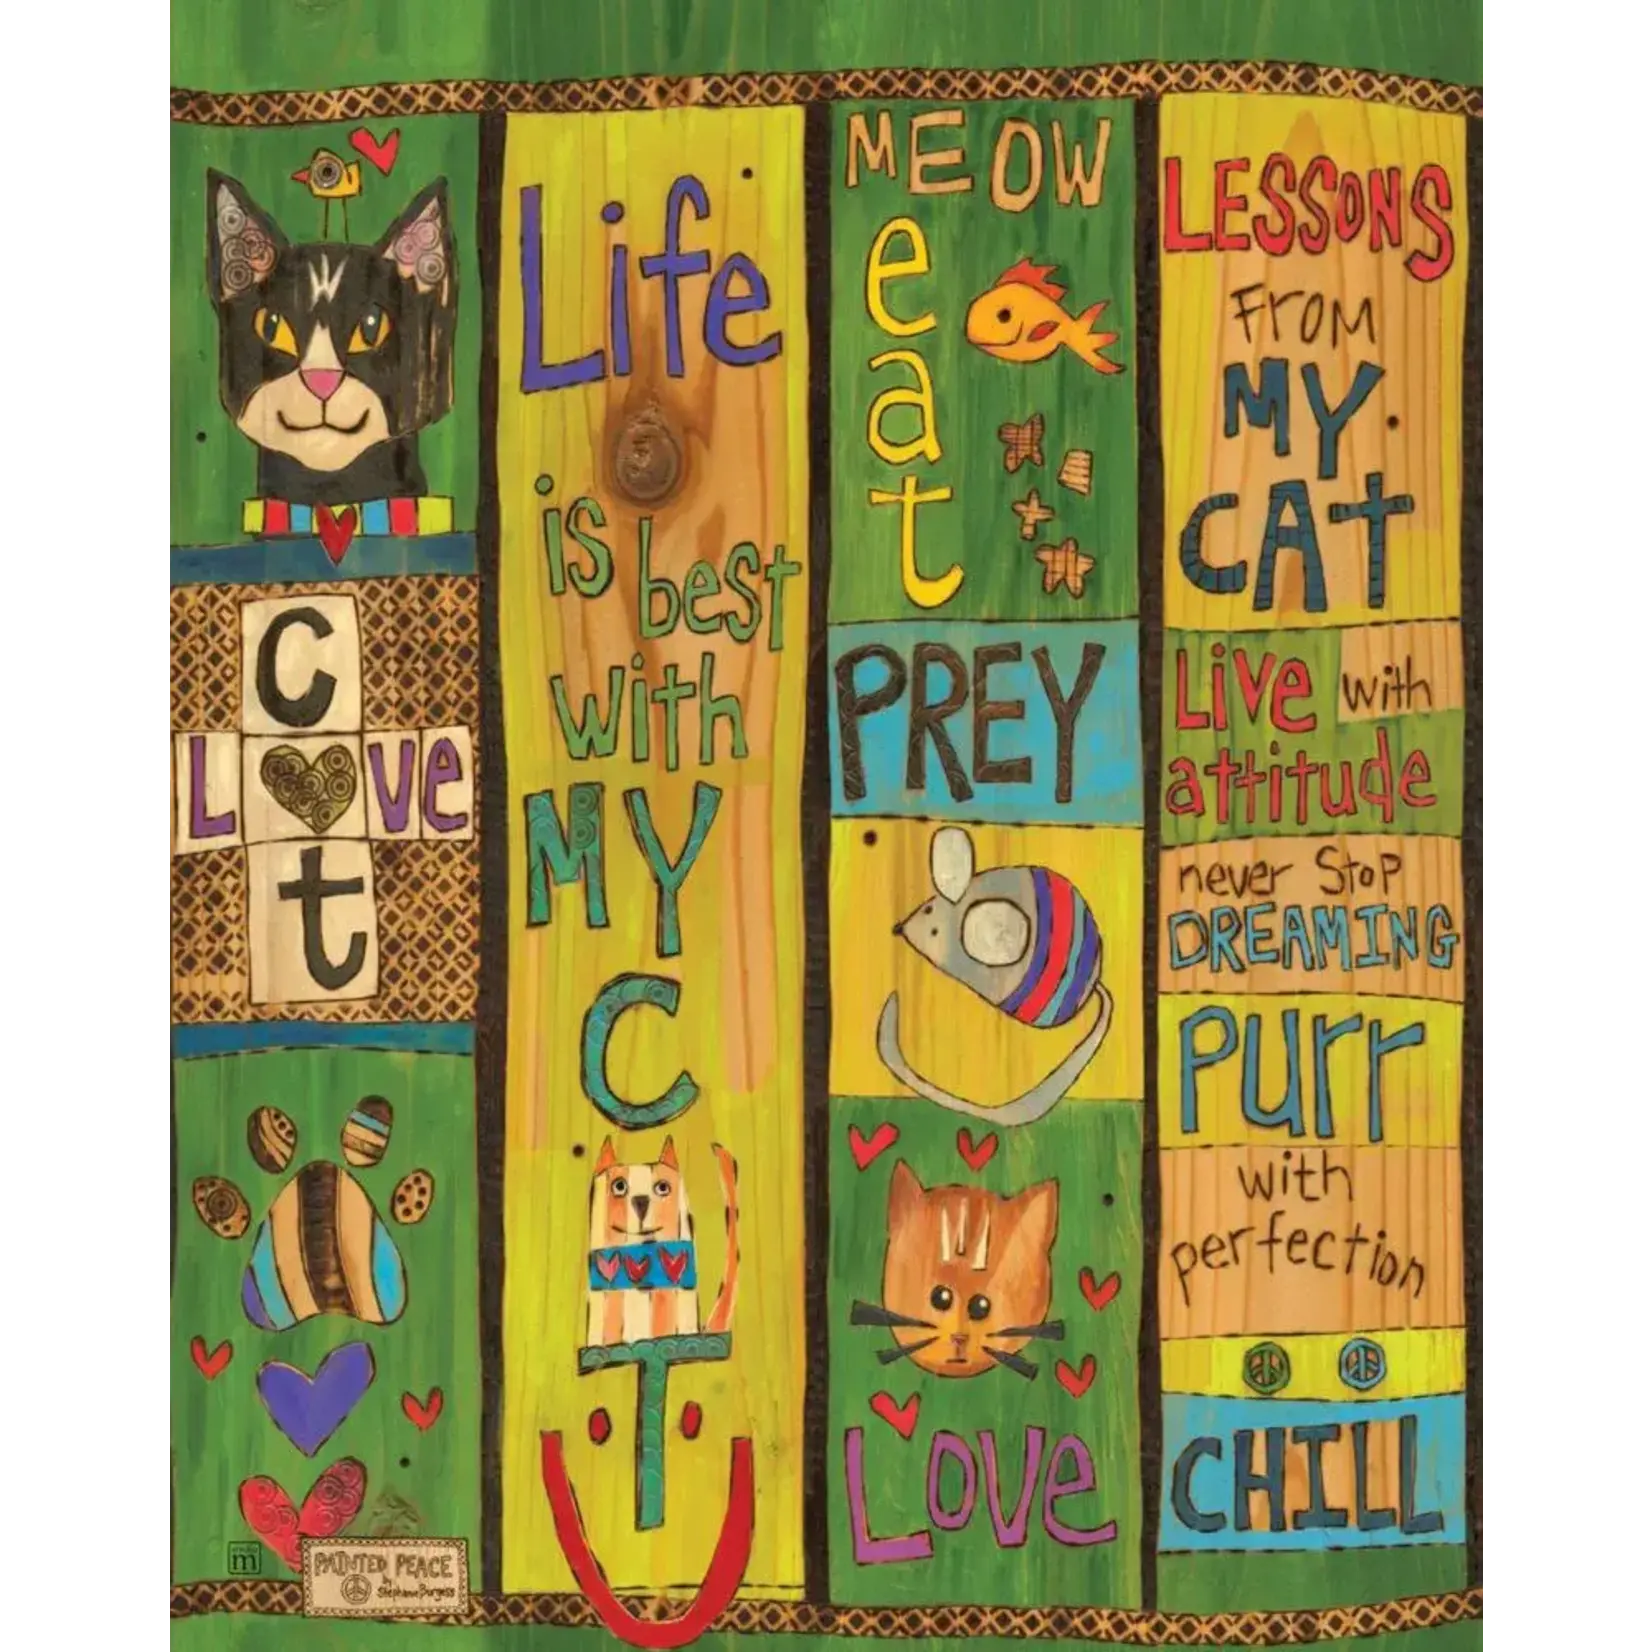 STUDIO-M ART POLE 20" - LESSONS FROM MY CAT